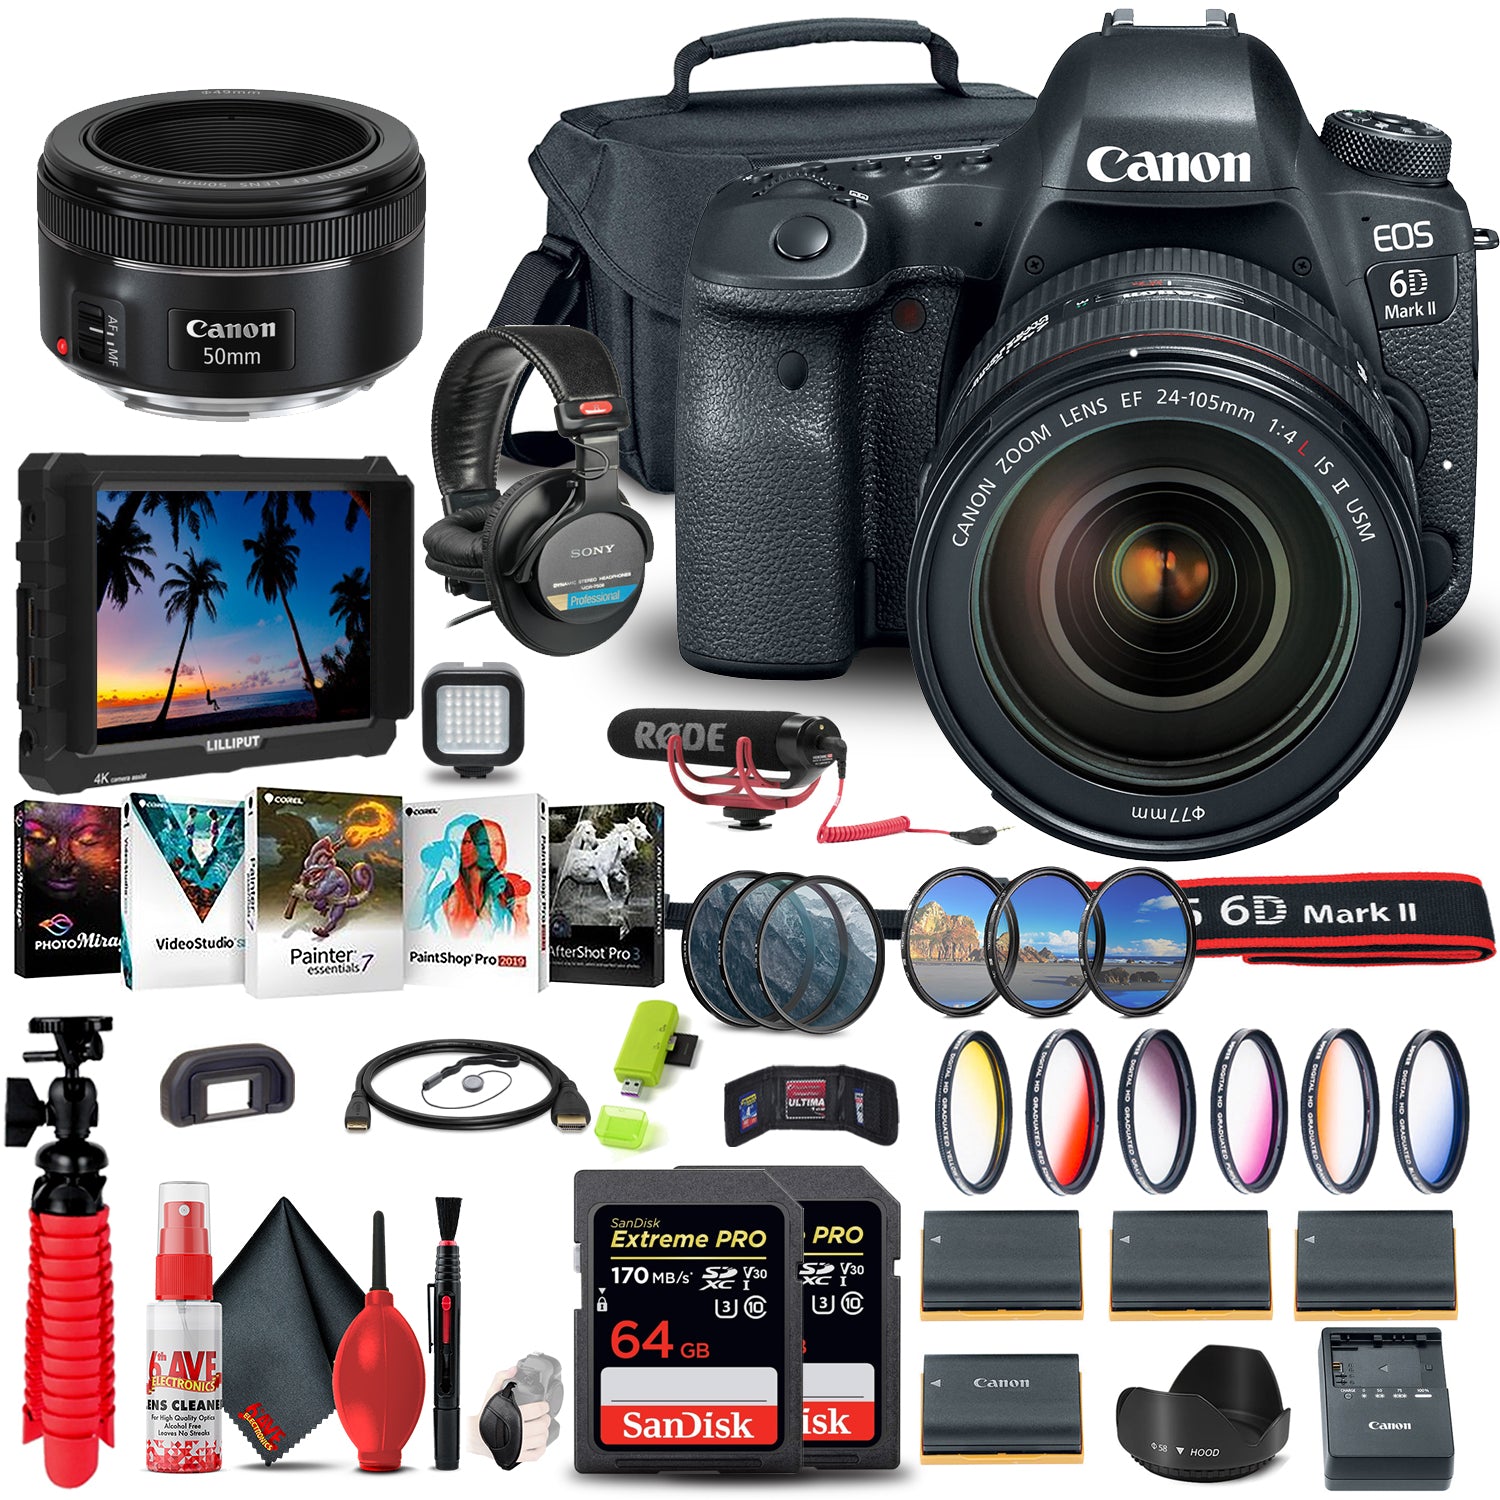 Canon EOS 6D Mark II Camera with 24-105mm f/4L II Lens (1897C009) Ultimate Sound Bundle